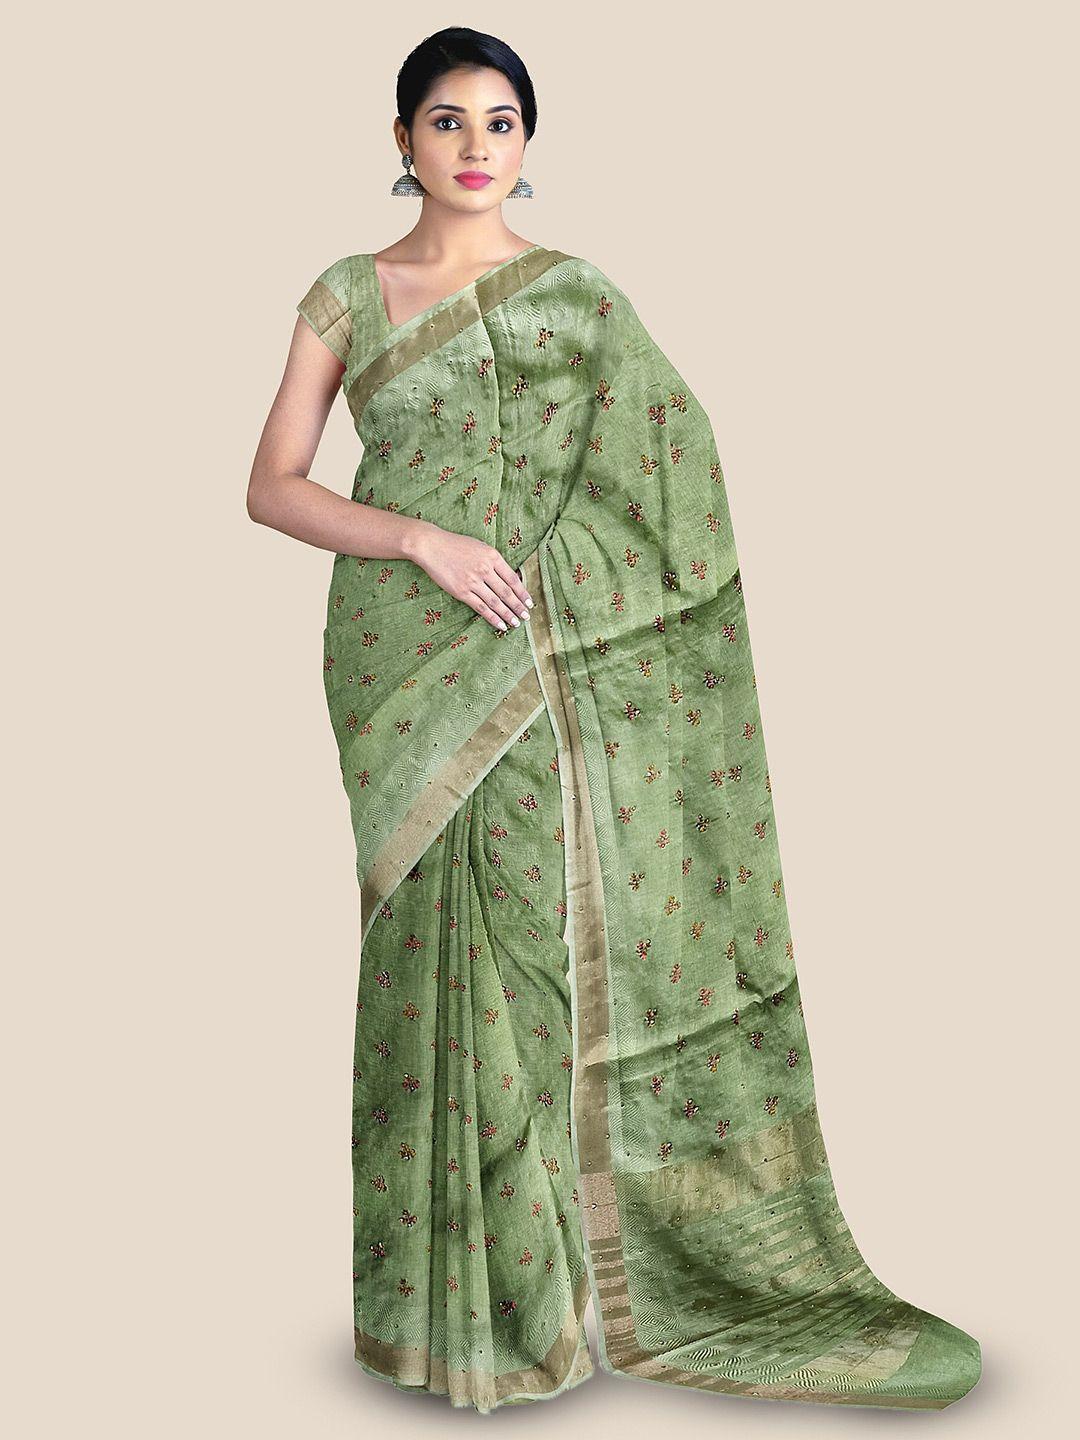 the chennai silks floral embroidered beads and stones jute cotton saree